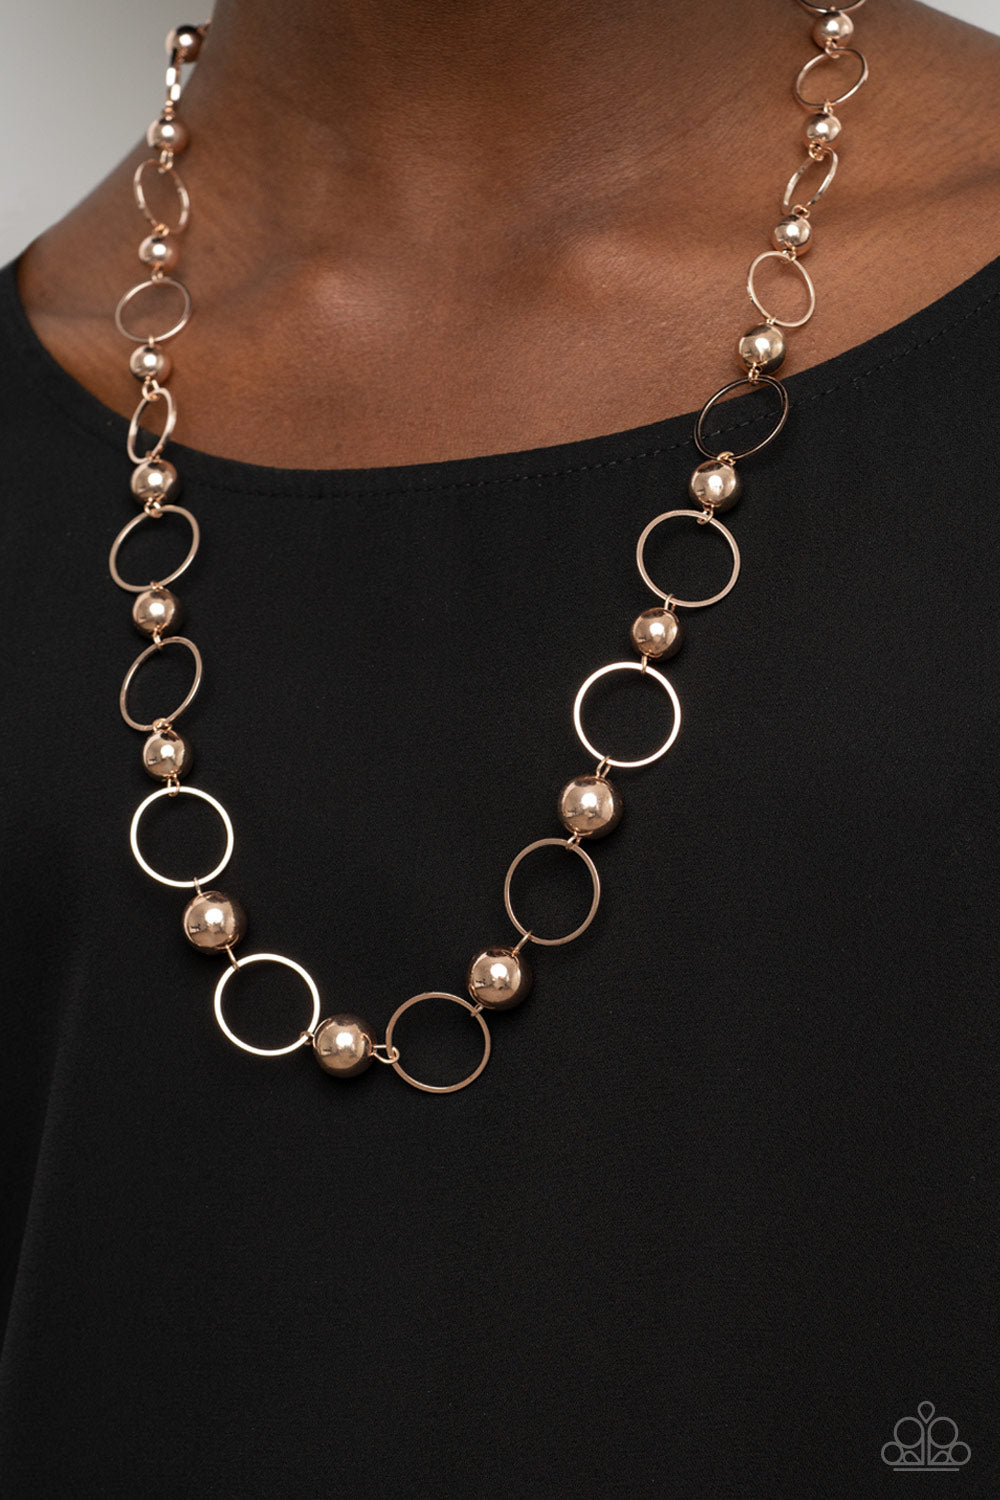 Metro Milestone Rose Gold Necklace - Paparazzi Accessories  Gradually increasing in size, a glistening collection of rose gold beads and rose gold hoops alternate across the chest for a classic metallic fashion. Features an adjustable clasp closure.  Sold as one individual necklace. Includes one pair of matching earrings.